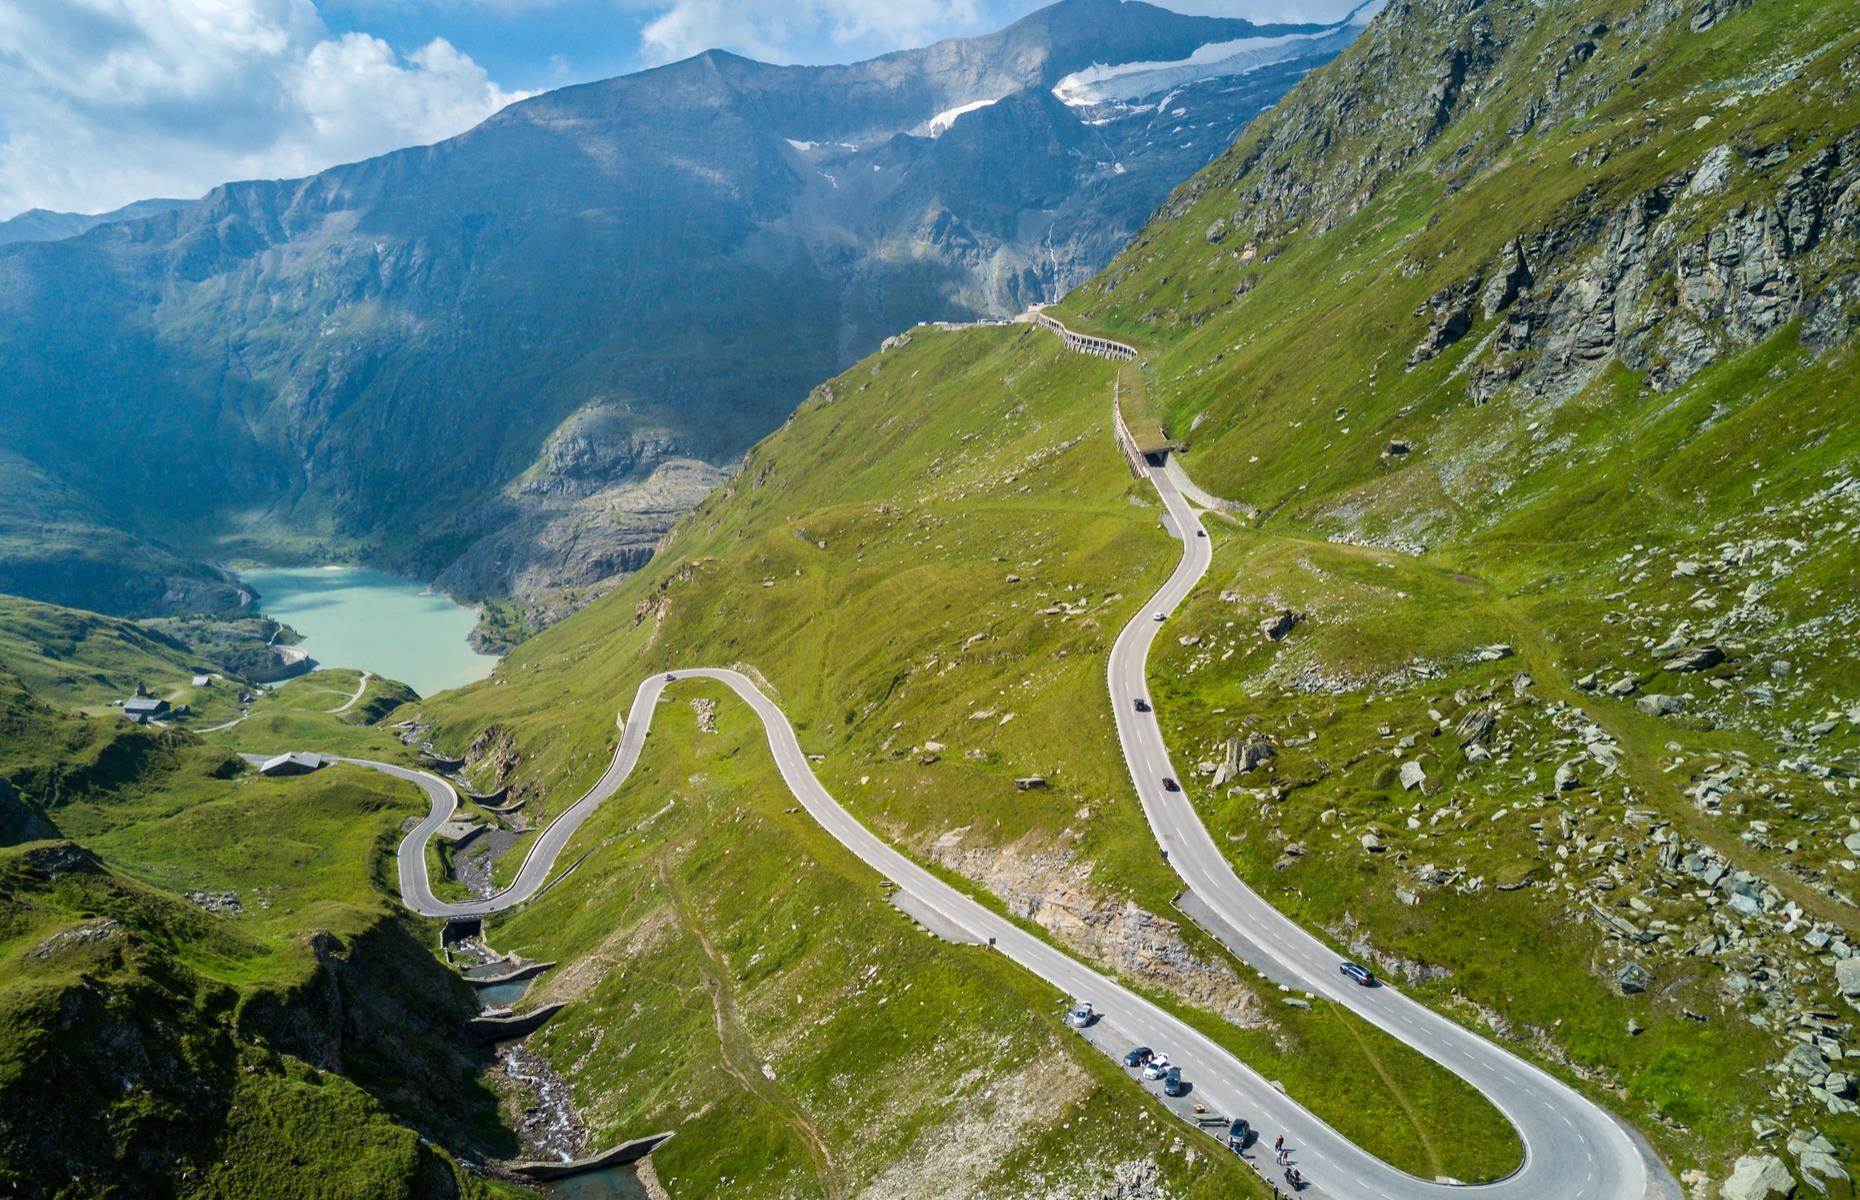 Follow Austria's most mesmerizing mountain pass to wind through the heart of High Tauern, the country's largest national park, and up its highest peak, the pyramid-shaped Grossglockner. The road has 26 sharp turns and sensational views all along the way. Thankfully, there are plenty of lookout points so designated drivers can also enjoy the incredible scenery: all alpine meadows, mountain forests, jagged cliffs and glaciers as far as the eyes can see.